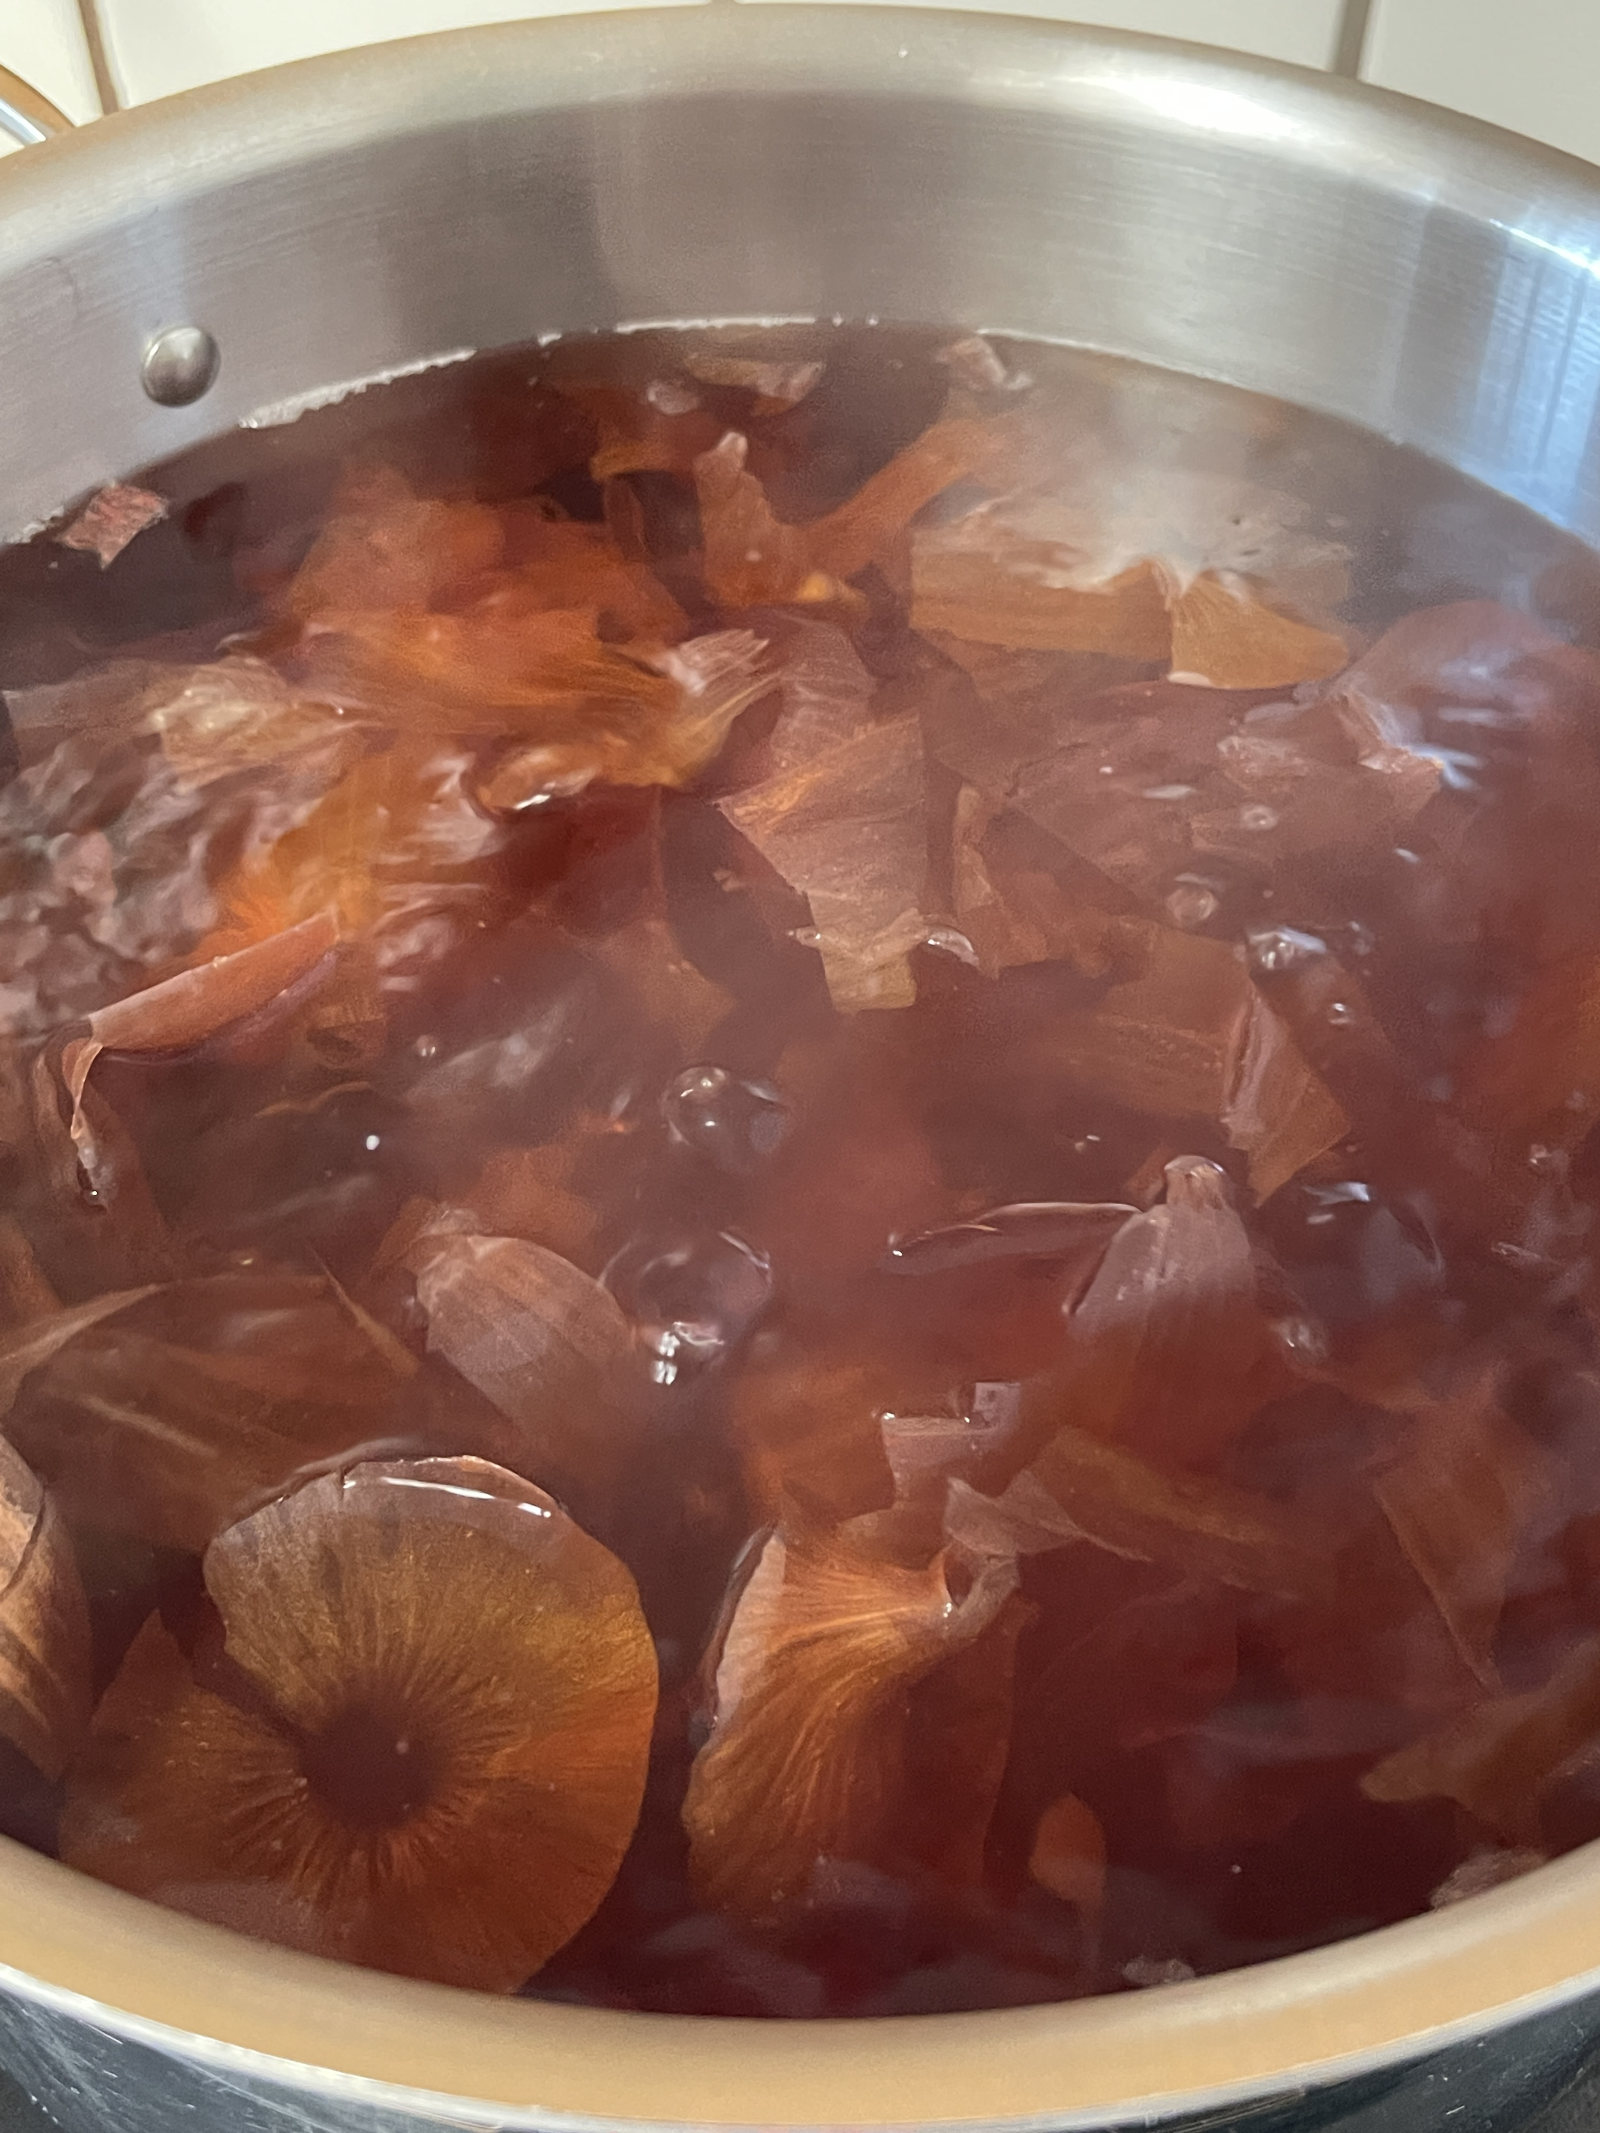 Simmering onion skins in water in a large stainless steel pot to make onion skin dye